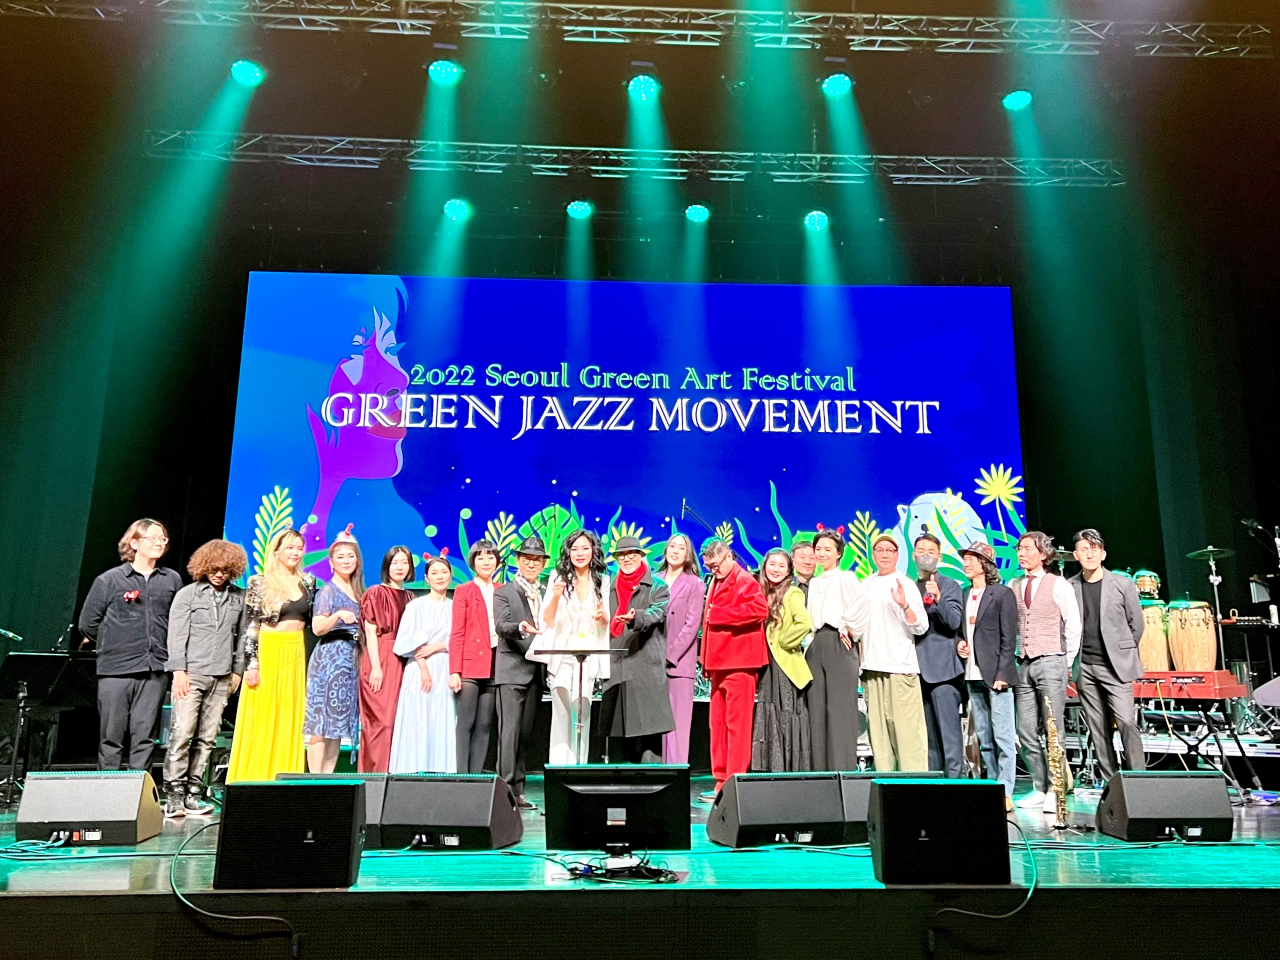 Jazz vocalists and musicians including Woong San (ninth from left) pose for photos after the Seoul Green Art Festival on Wednesday. (Korea Jazz Association)